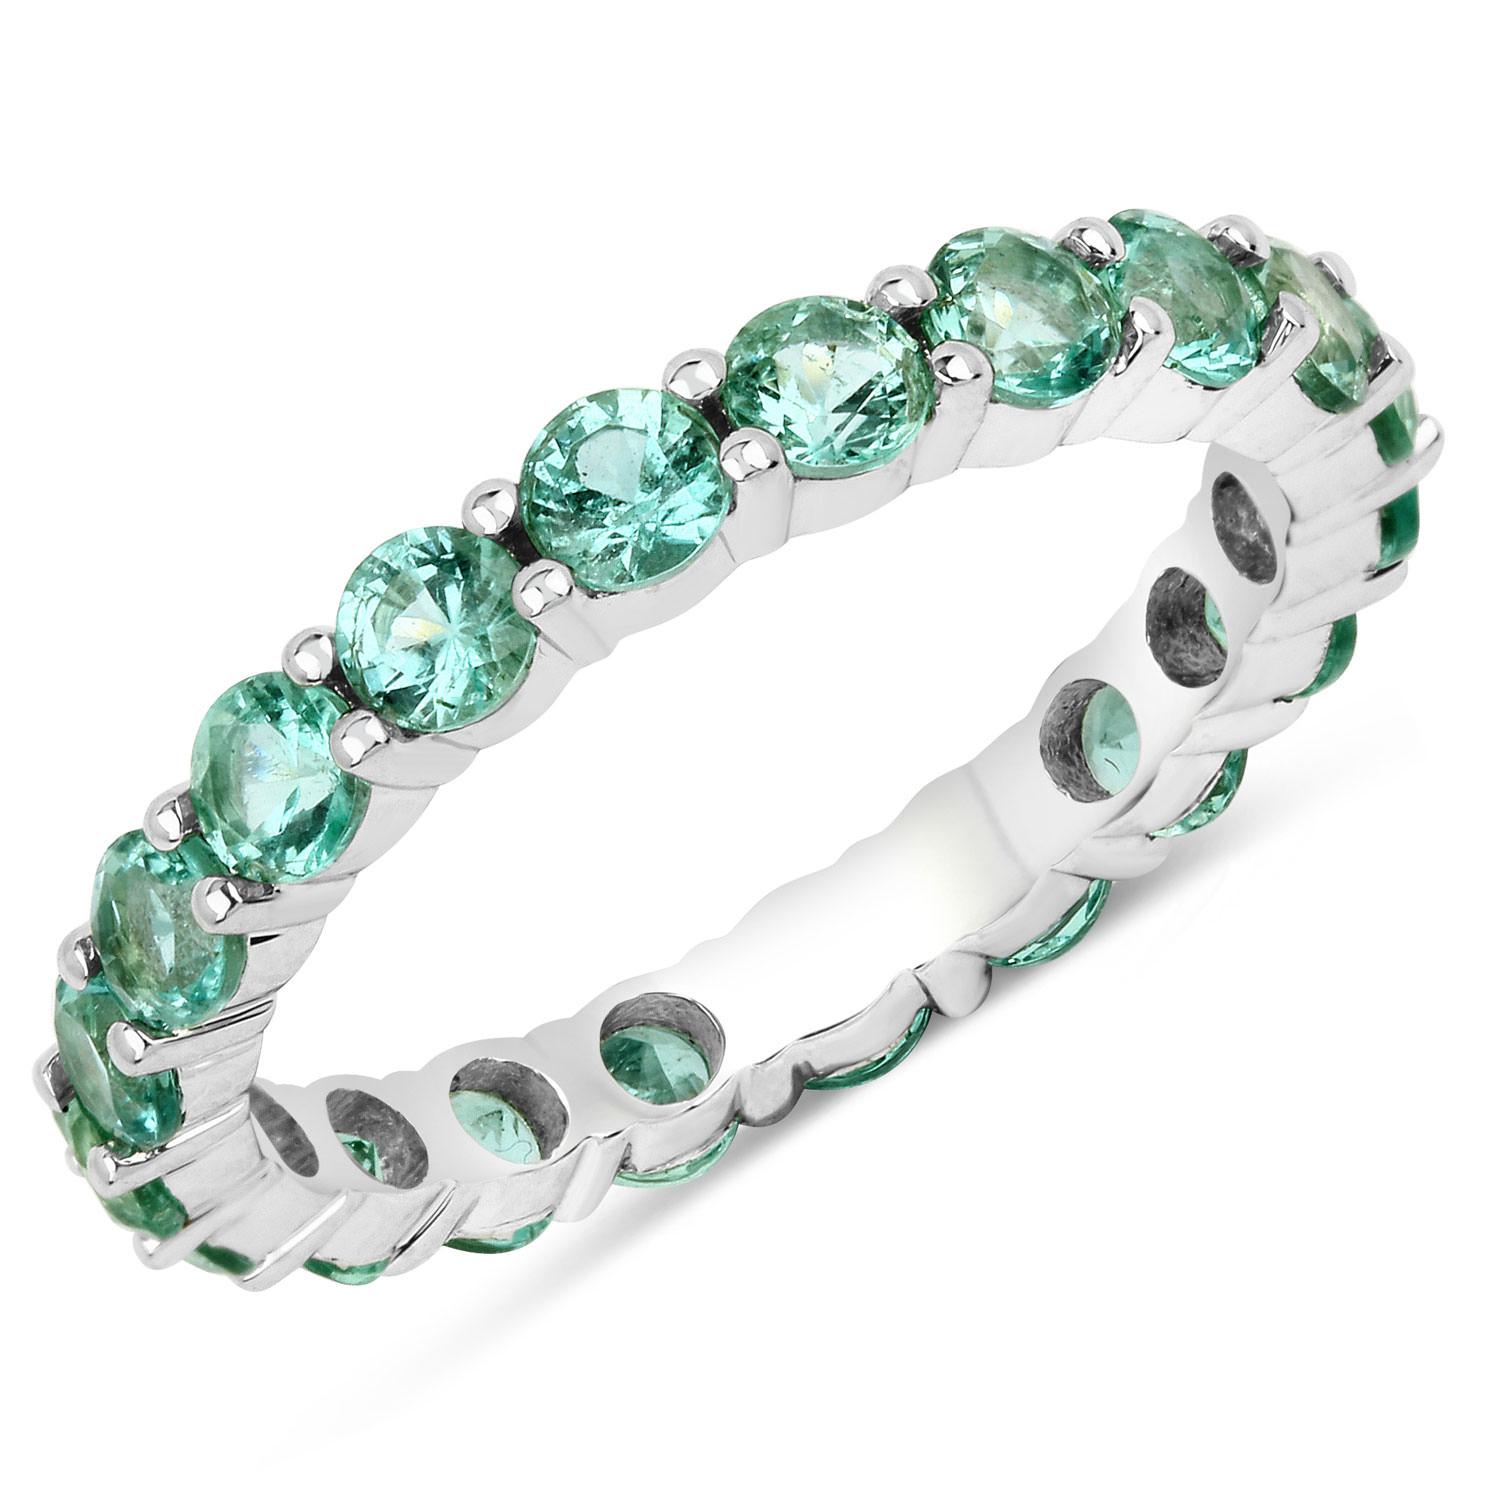 It comes with the appraisal by GIA GG/AJP
Emerald = 2 Carats
Cut: Round
Stone Quantity: 20
Metal: 14K White Gold
Height: 3 mm
Width: 23 mm
Length: 3 mm
Ring Size: 7* US